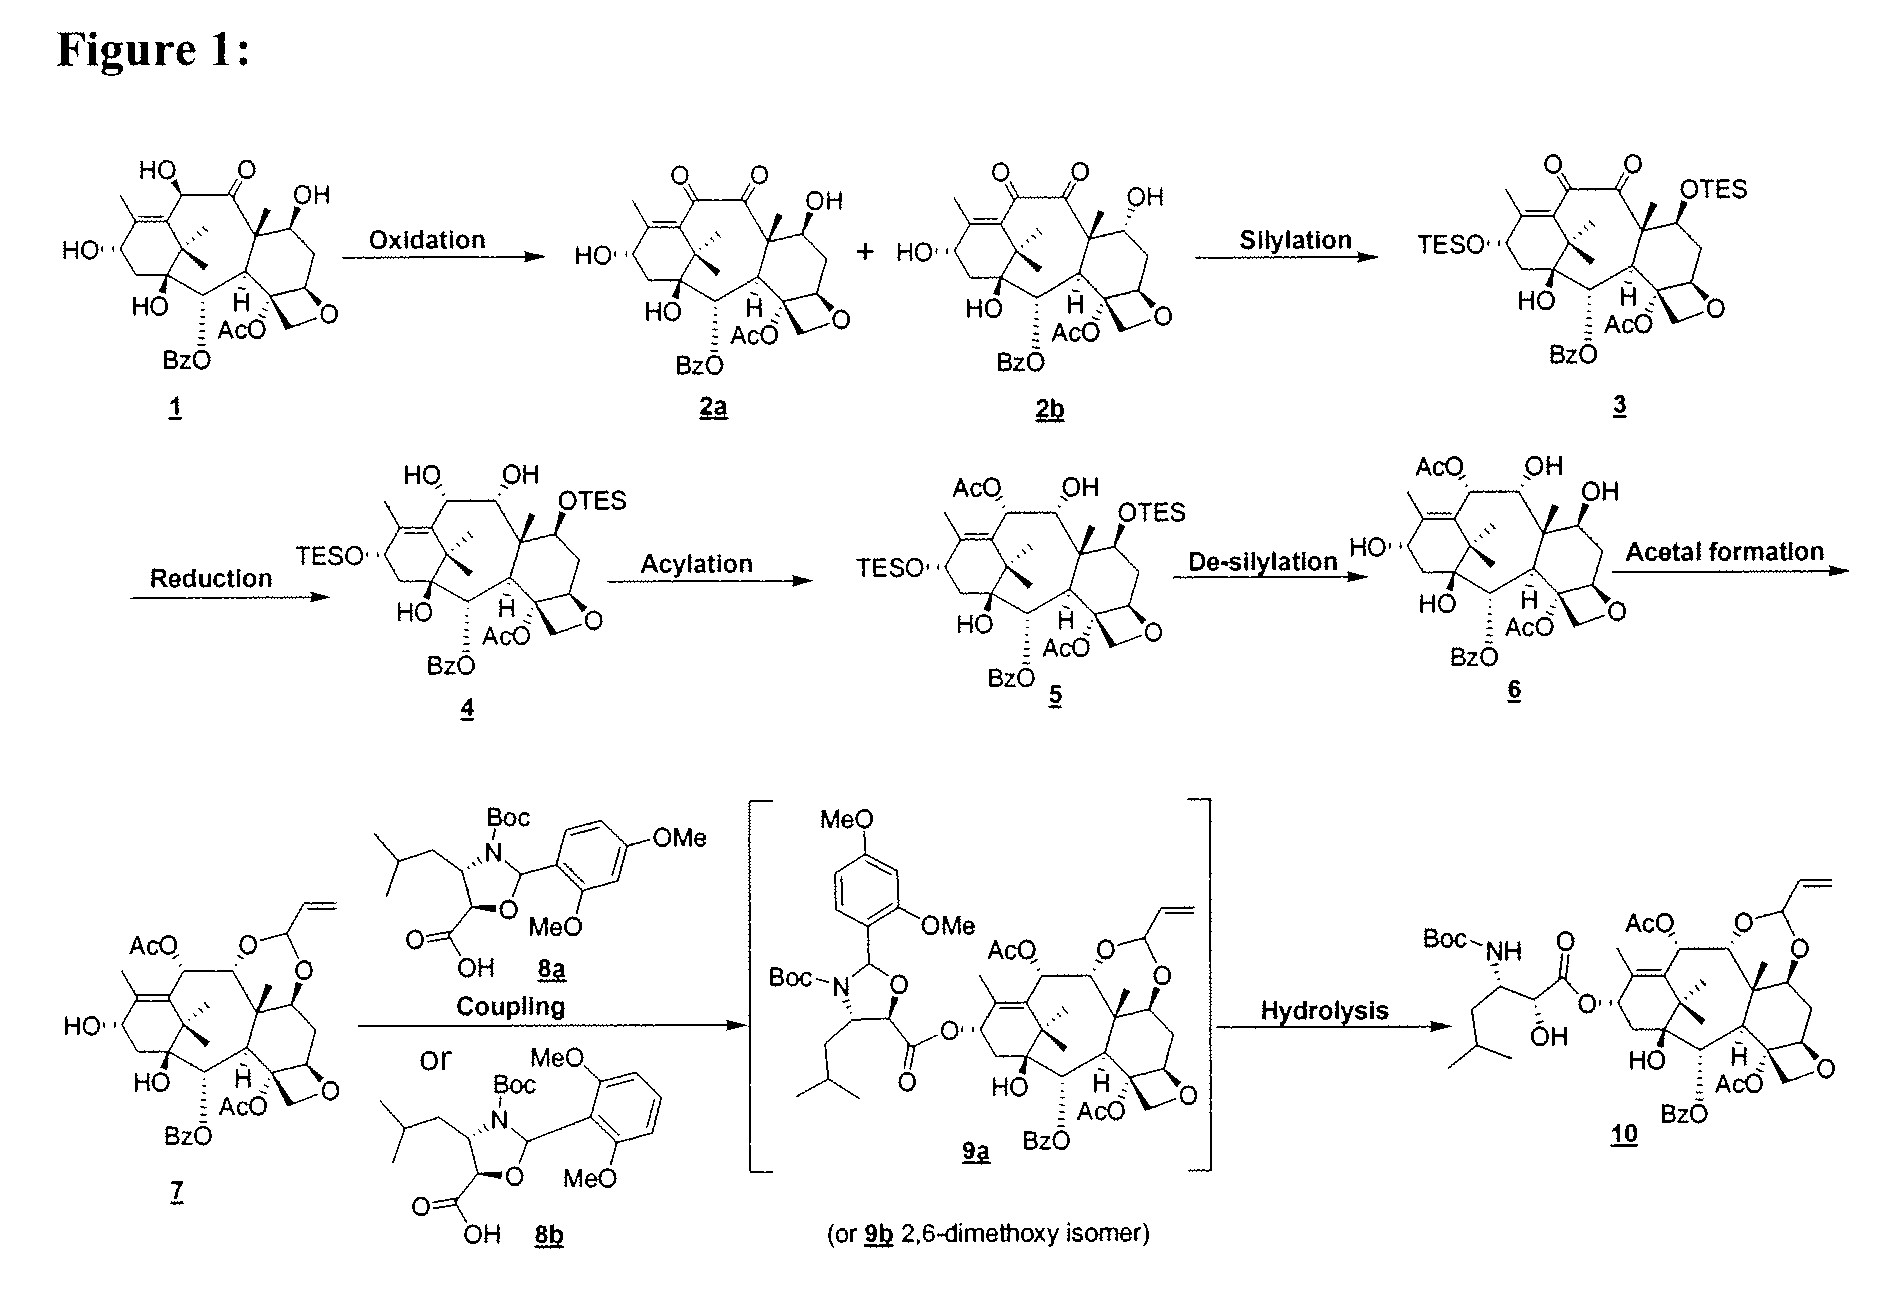 Convergent Process for the Synthesis of Taxane Derivatives